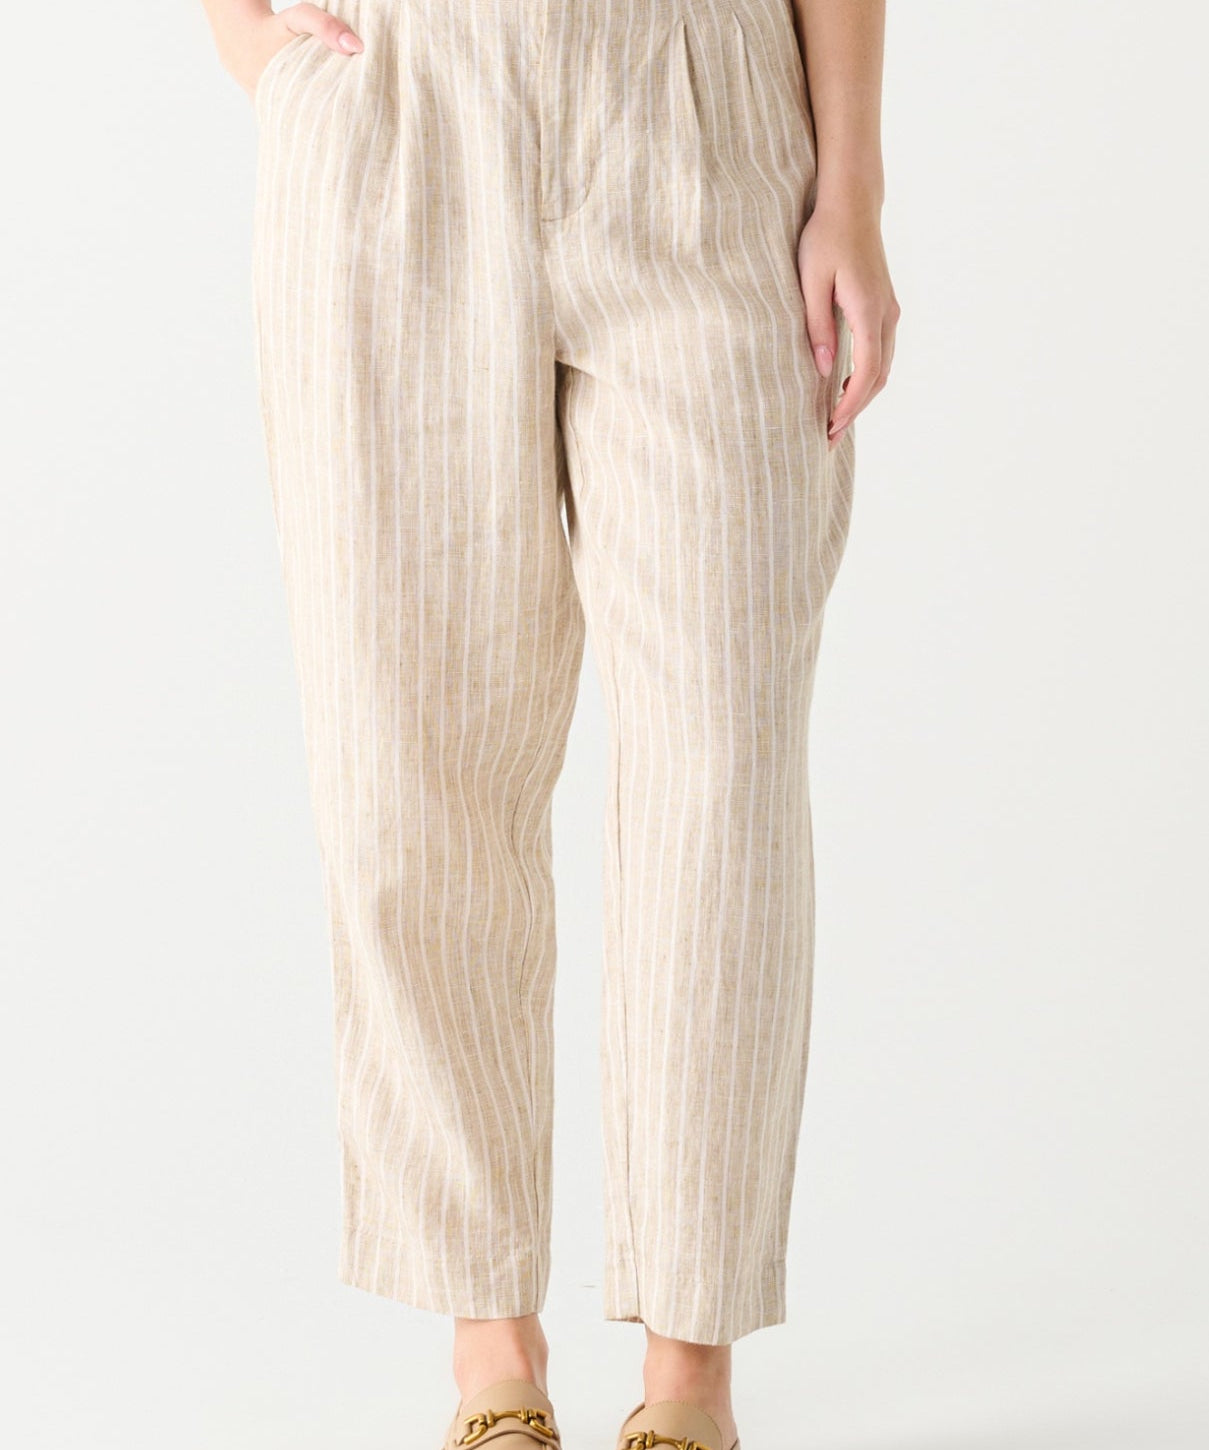 Linen blend tapered striped pants by Black Tape - Blue Sky Fashions & Lingerie